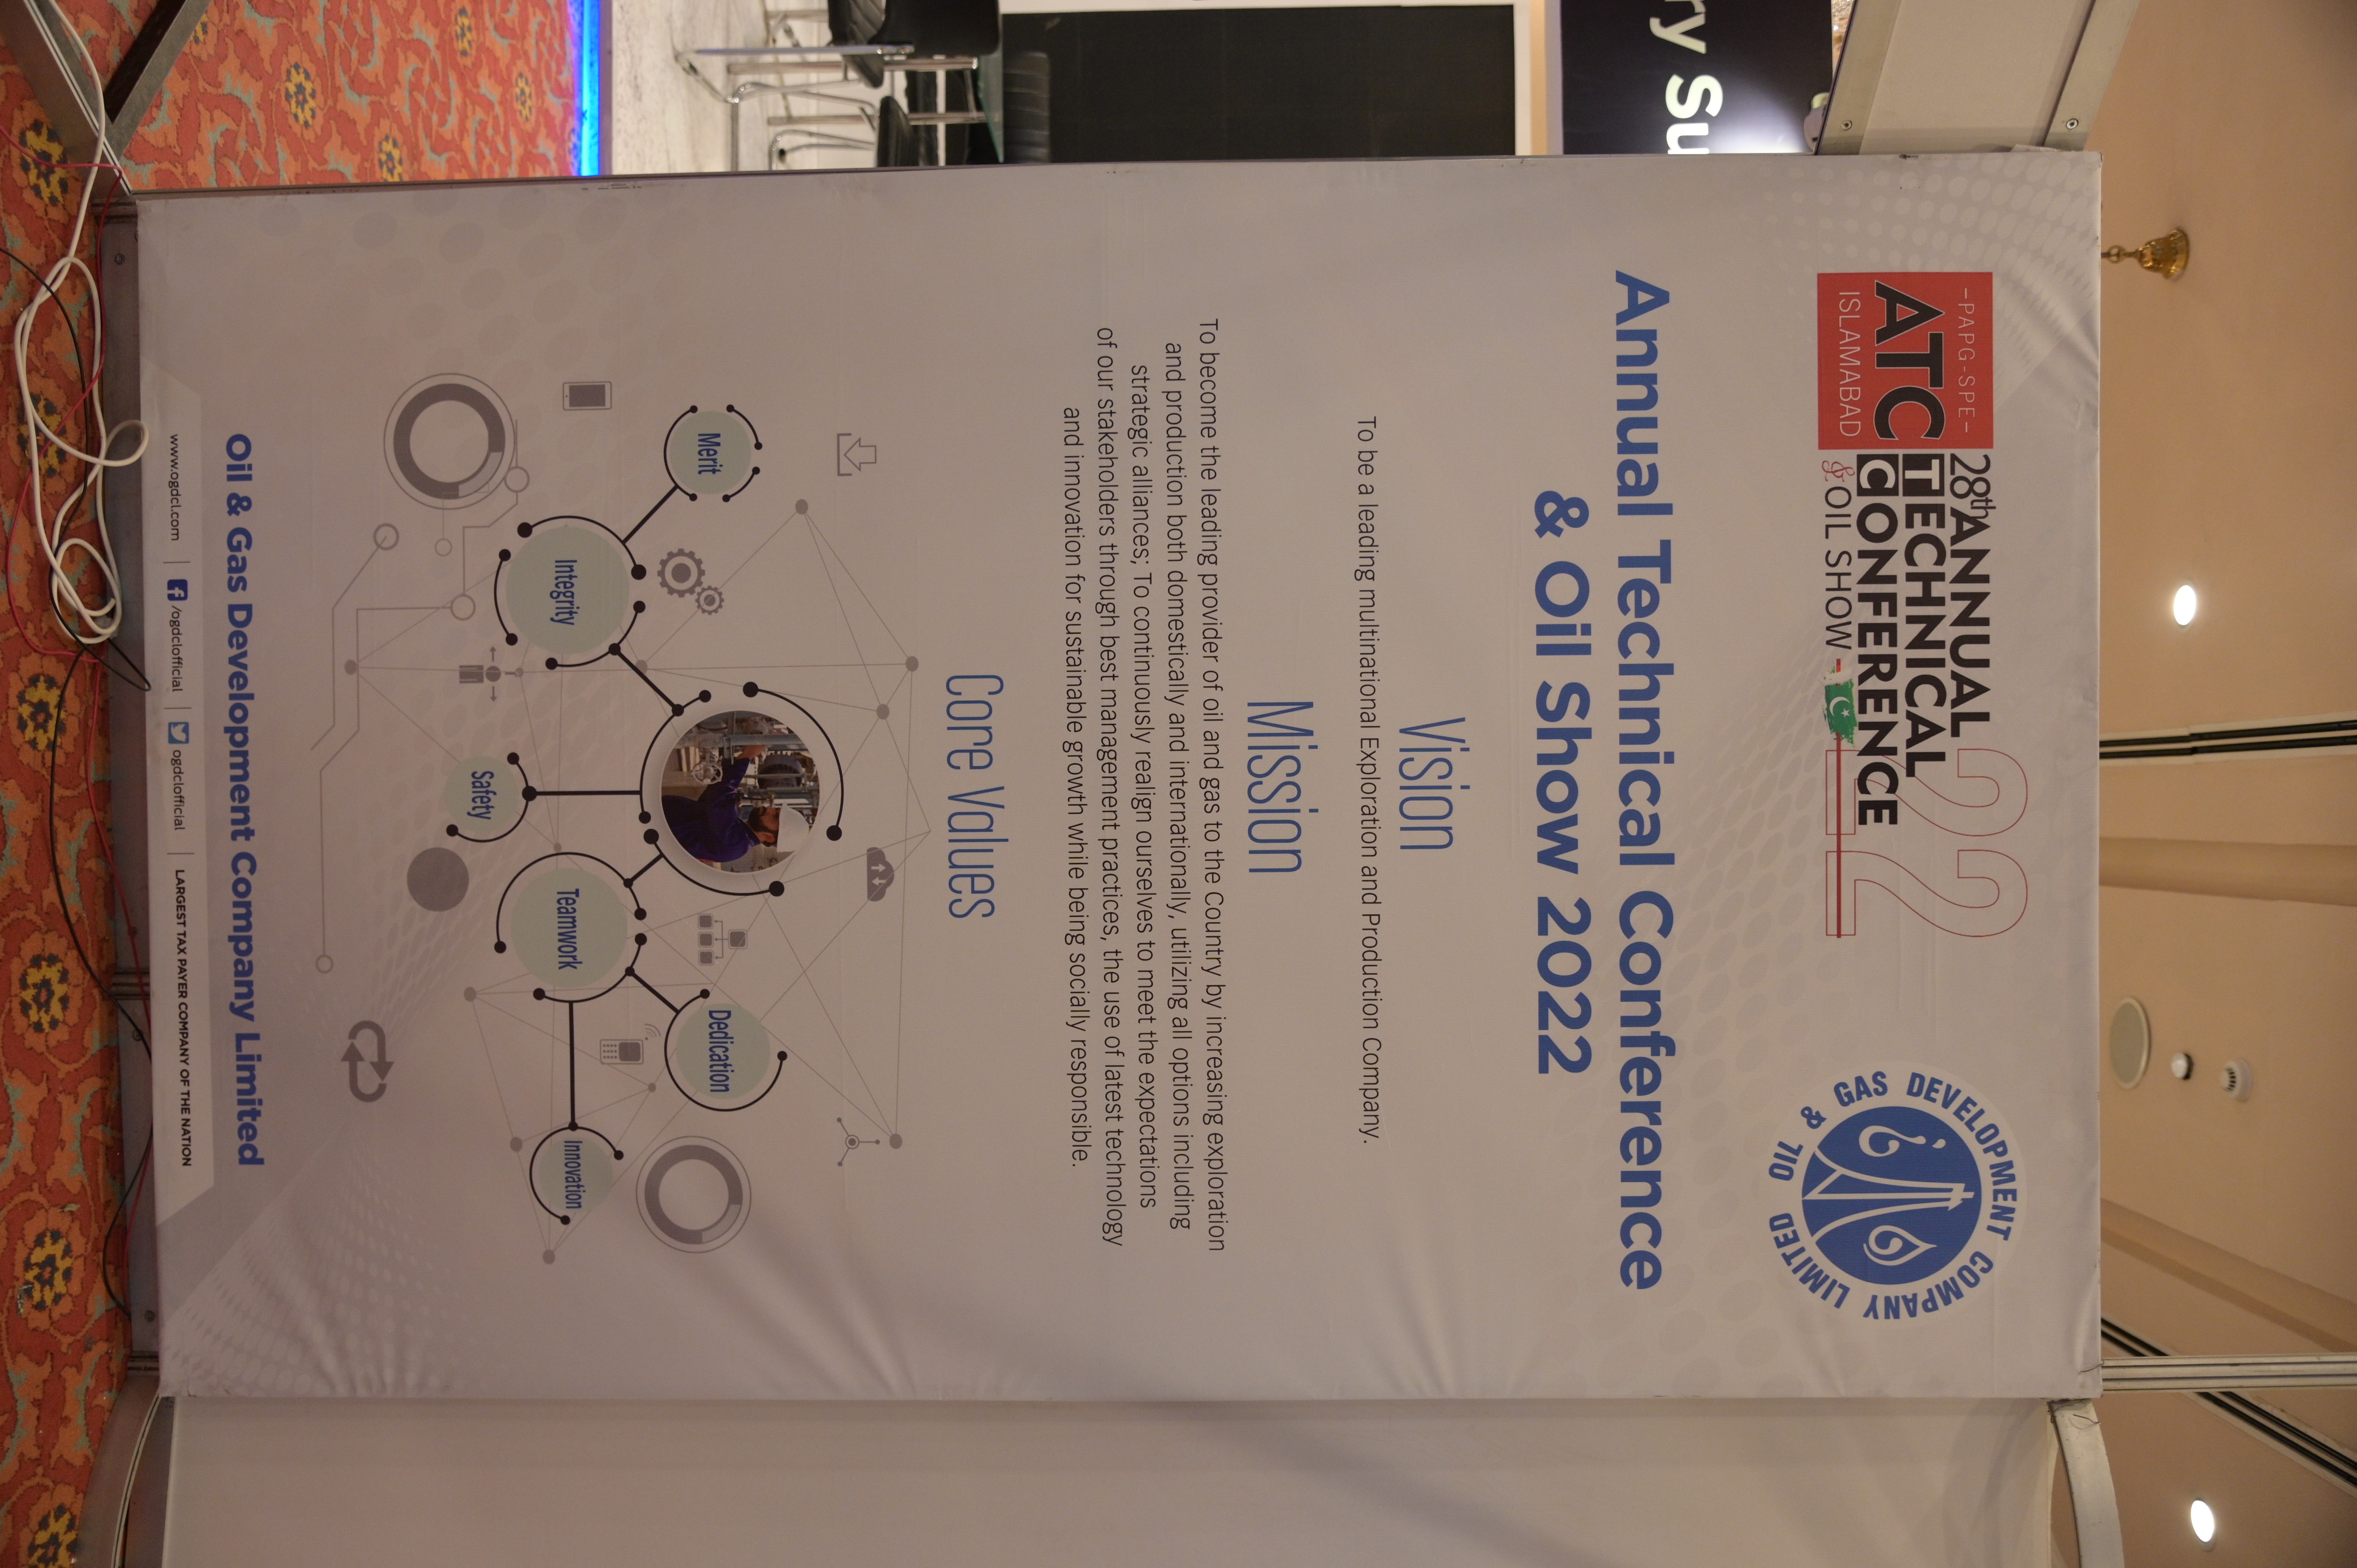 The banner showing the mission, vision and the core values of 28th annual technical conference and oil show